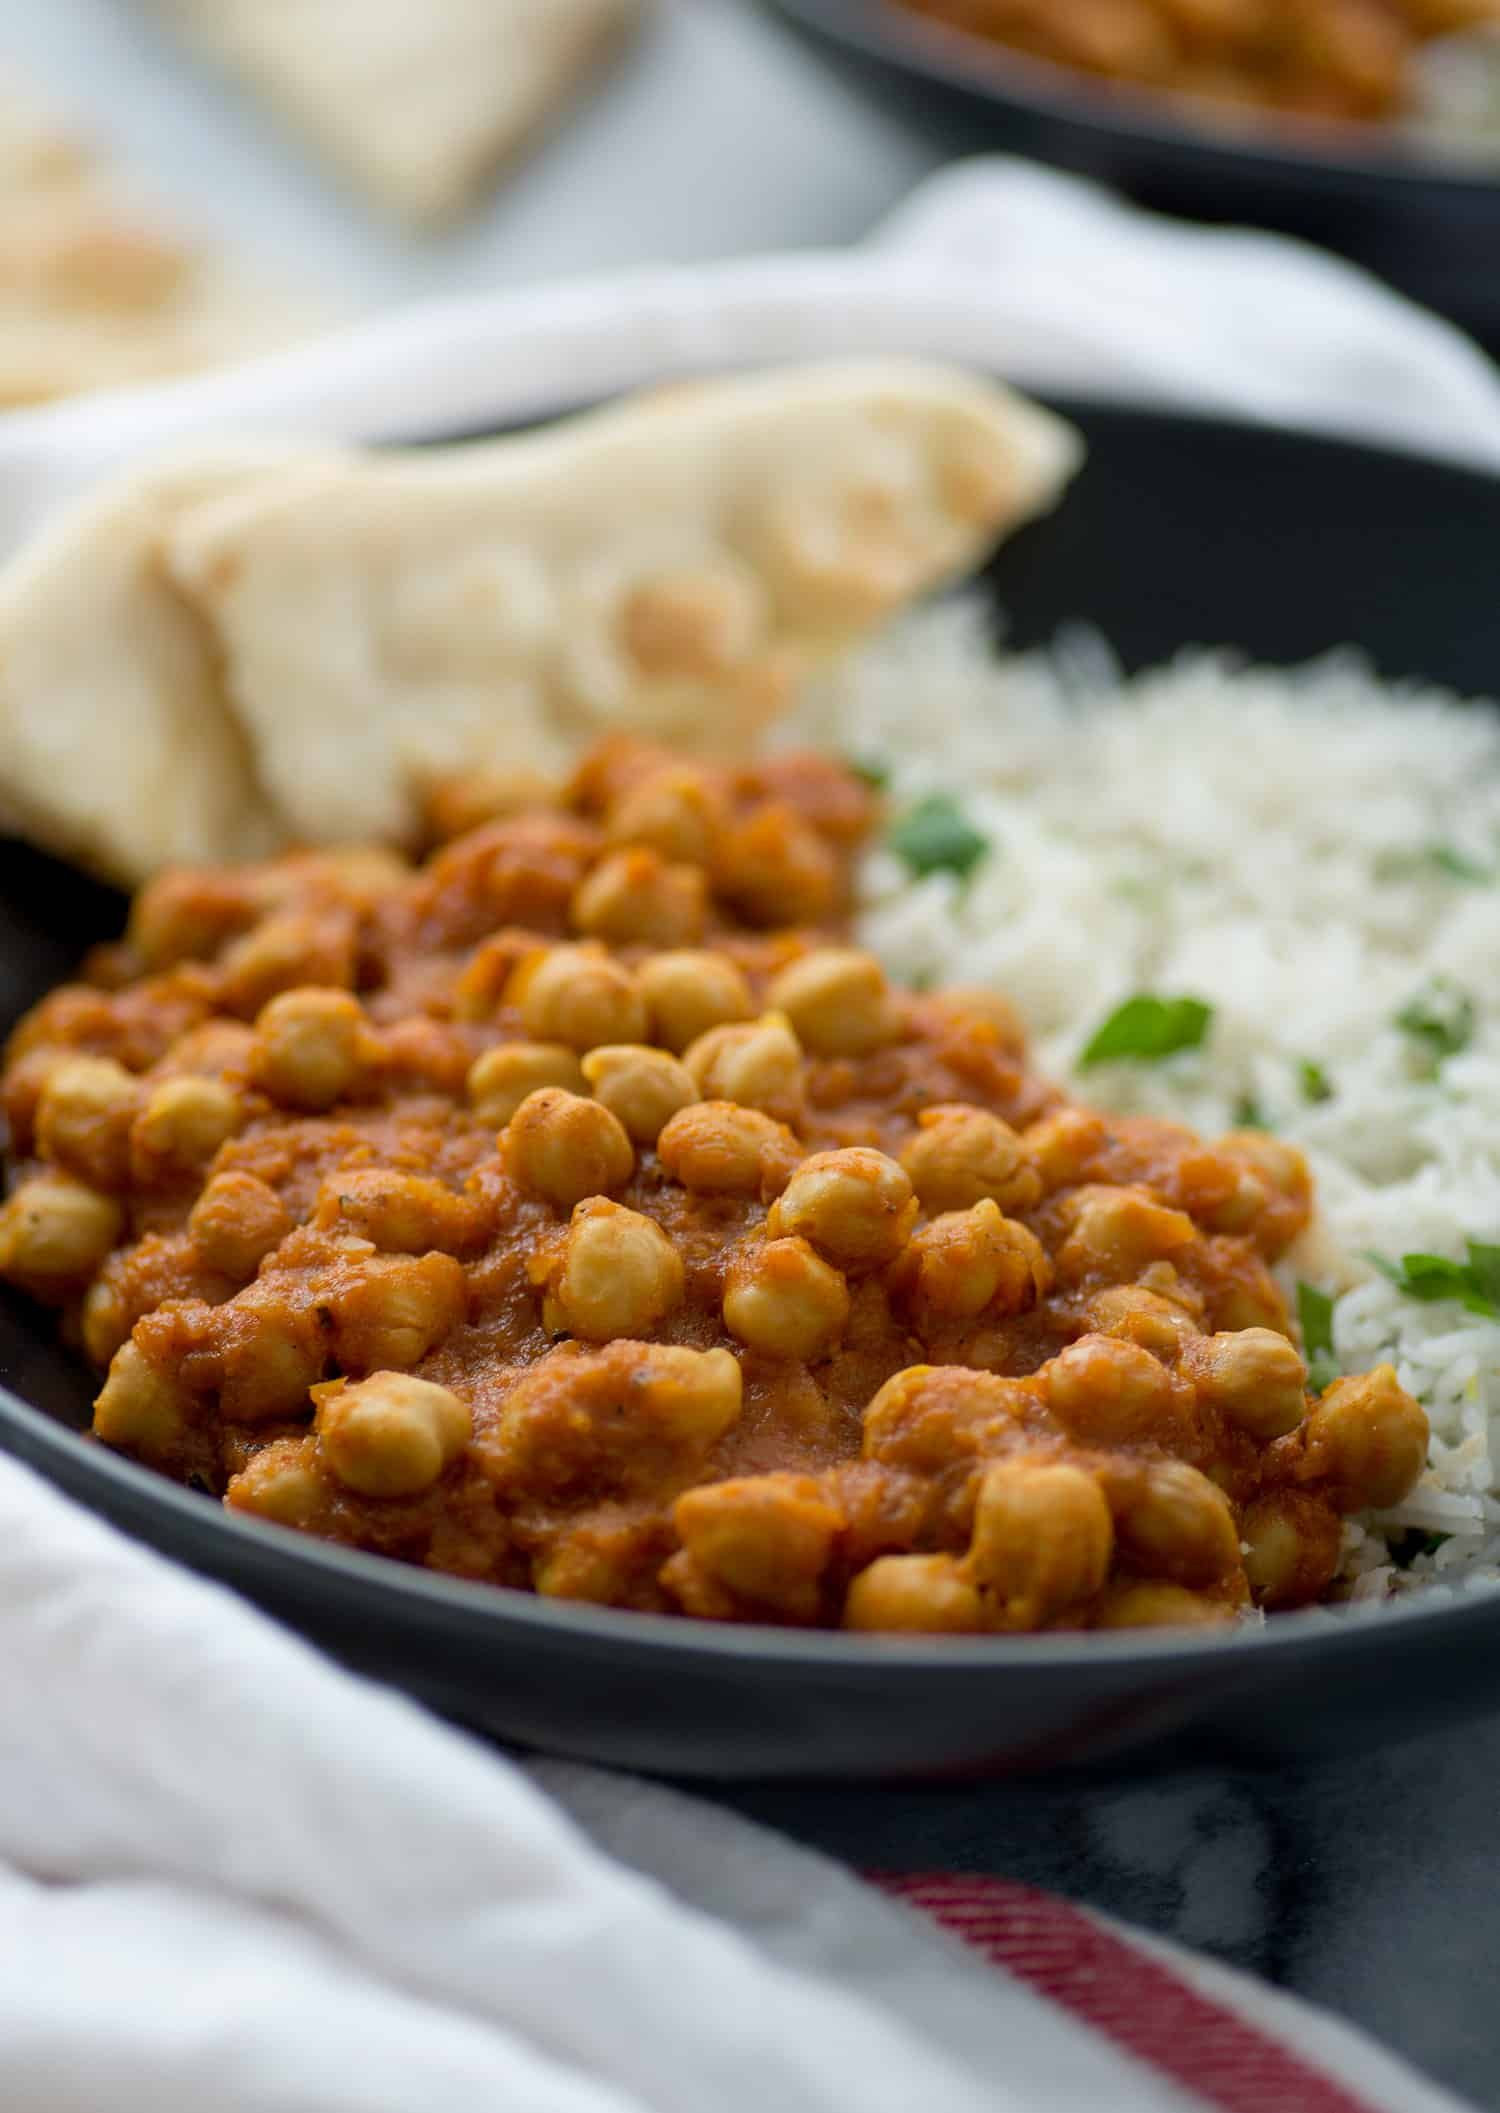 Slow Cooker Indian Vegetarian Recipes
 Slow Cooker Channa Masala Recipe